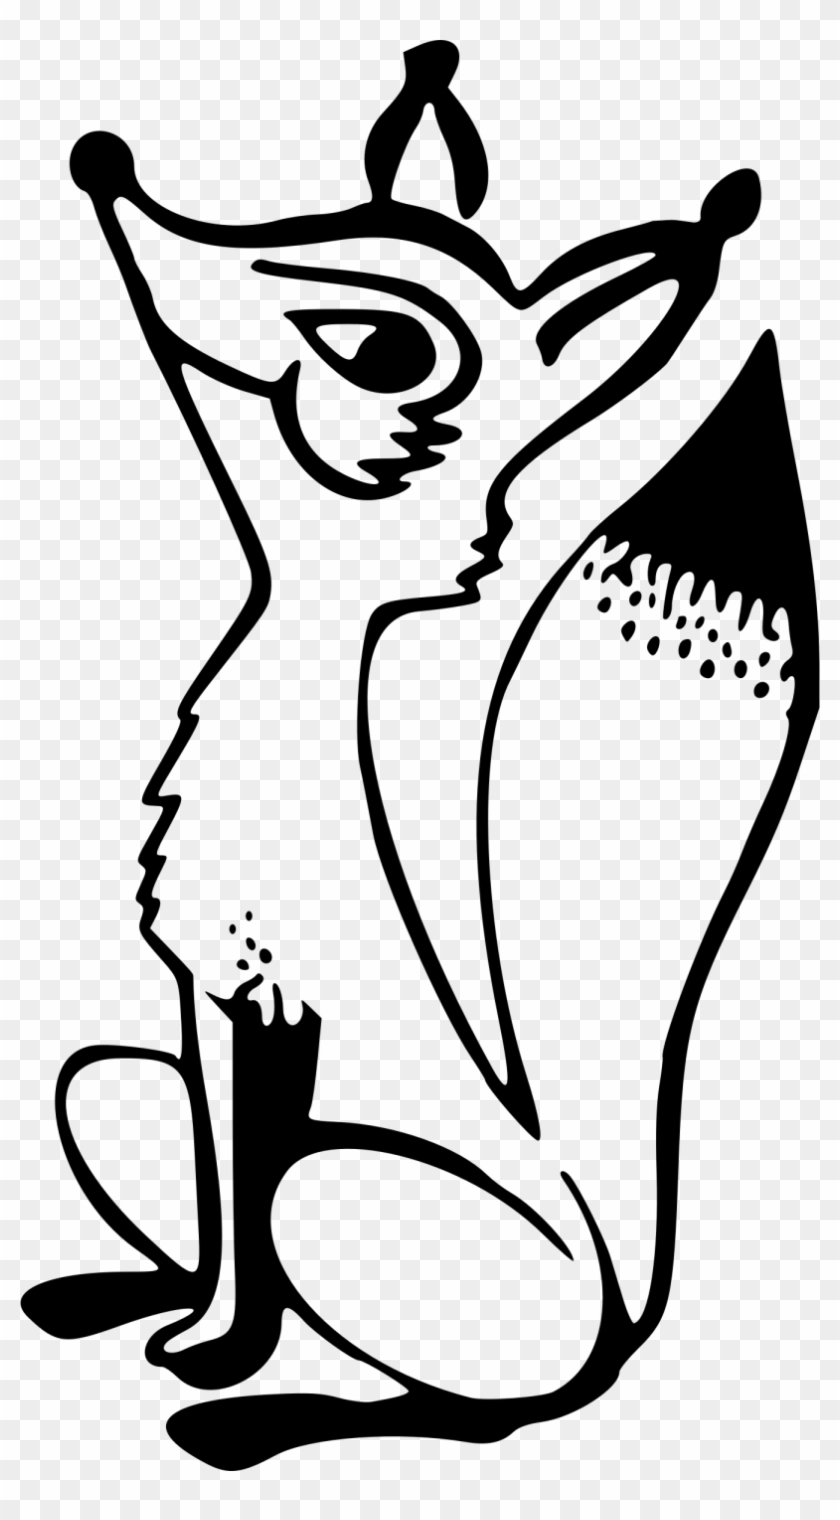 Simple Fox Line Drawing Also Simple Cute Fox Drawing - Fox Clipart Black And White #996147